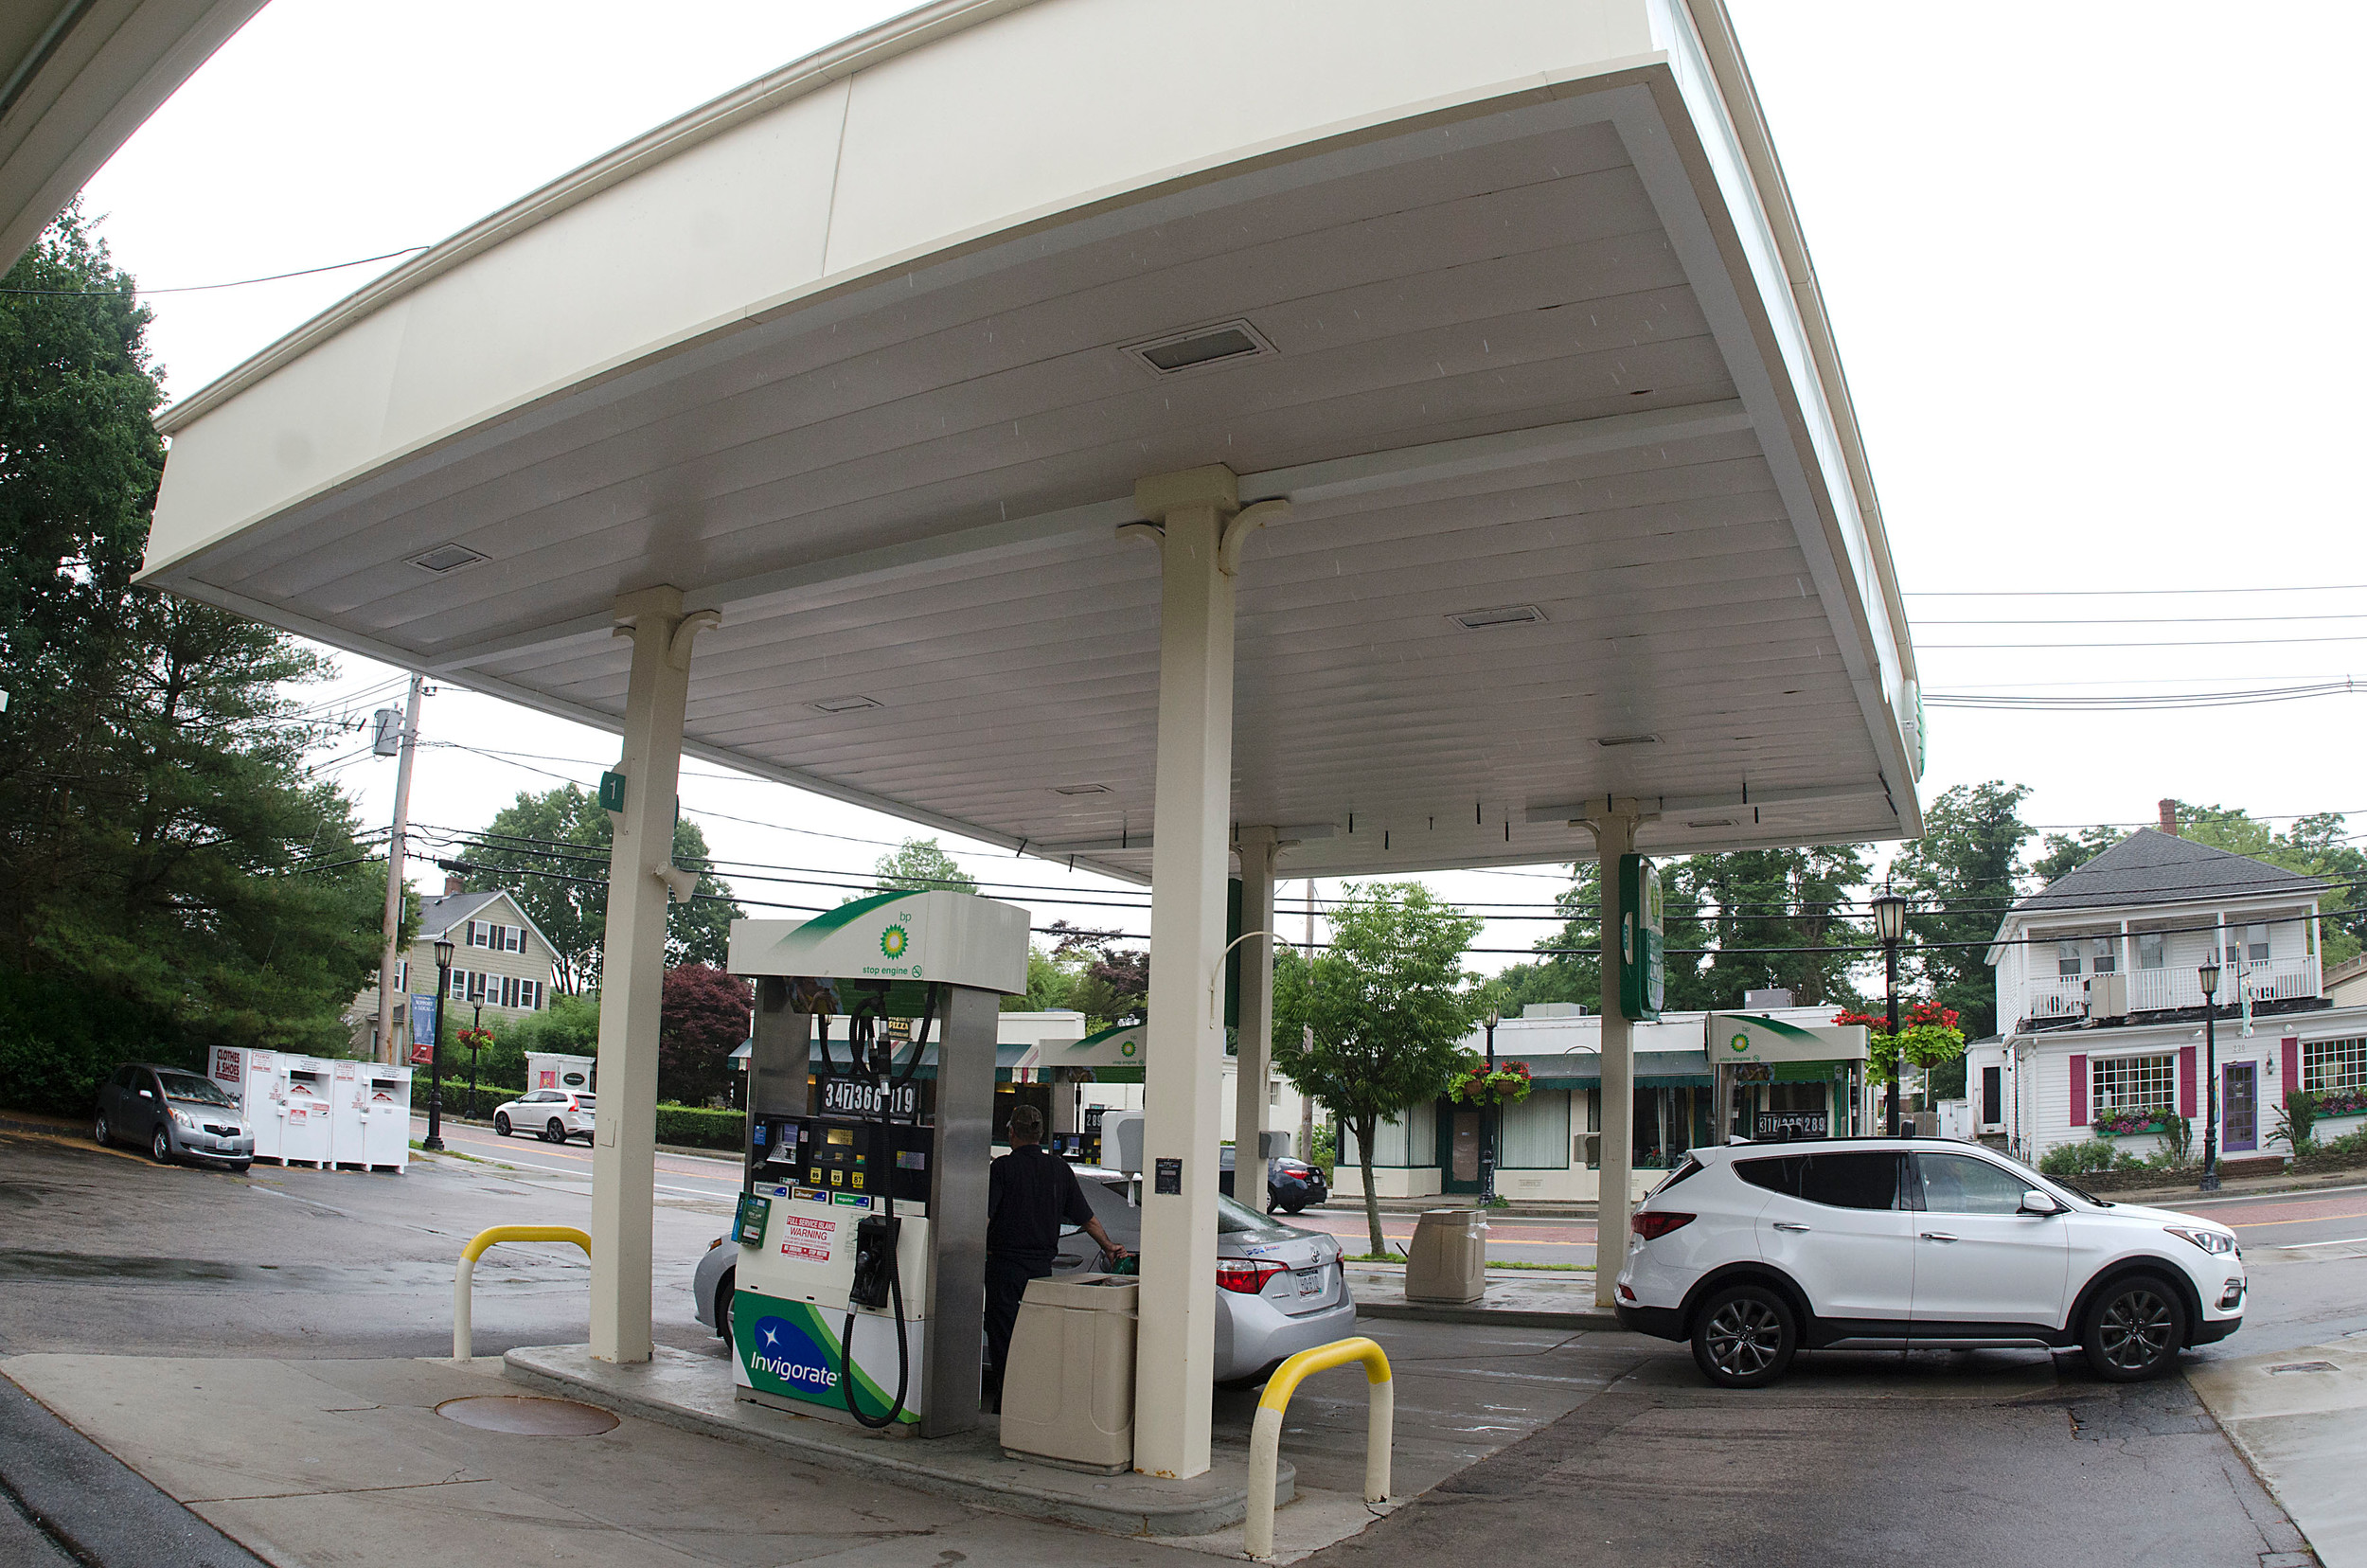 There is a proposal to build a restaurant where the BP gas station was located.